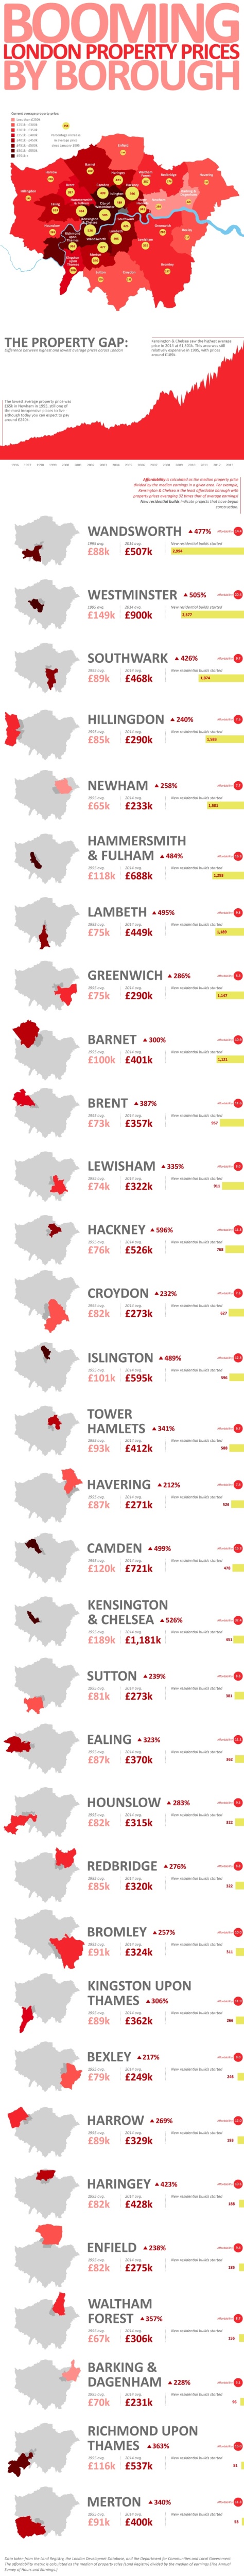 London-House-Prices